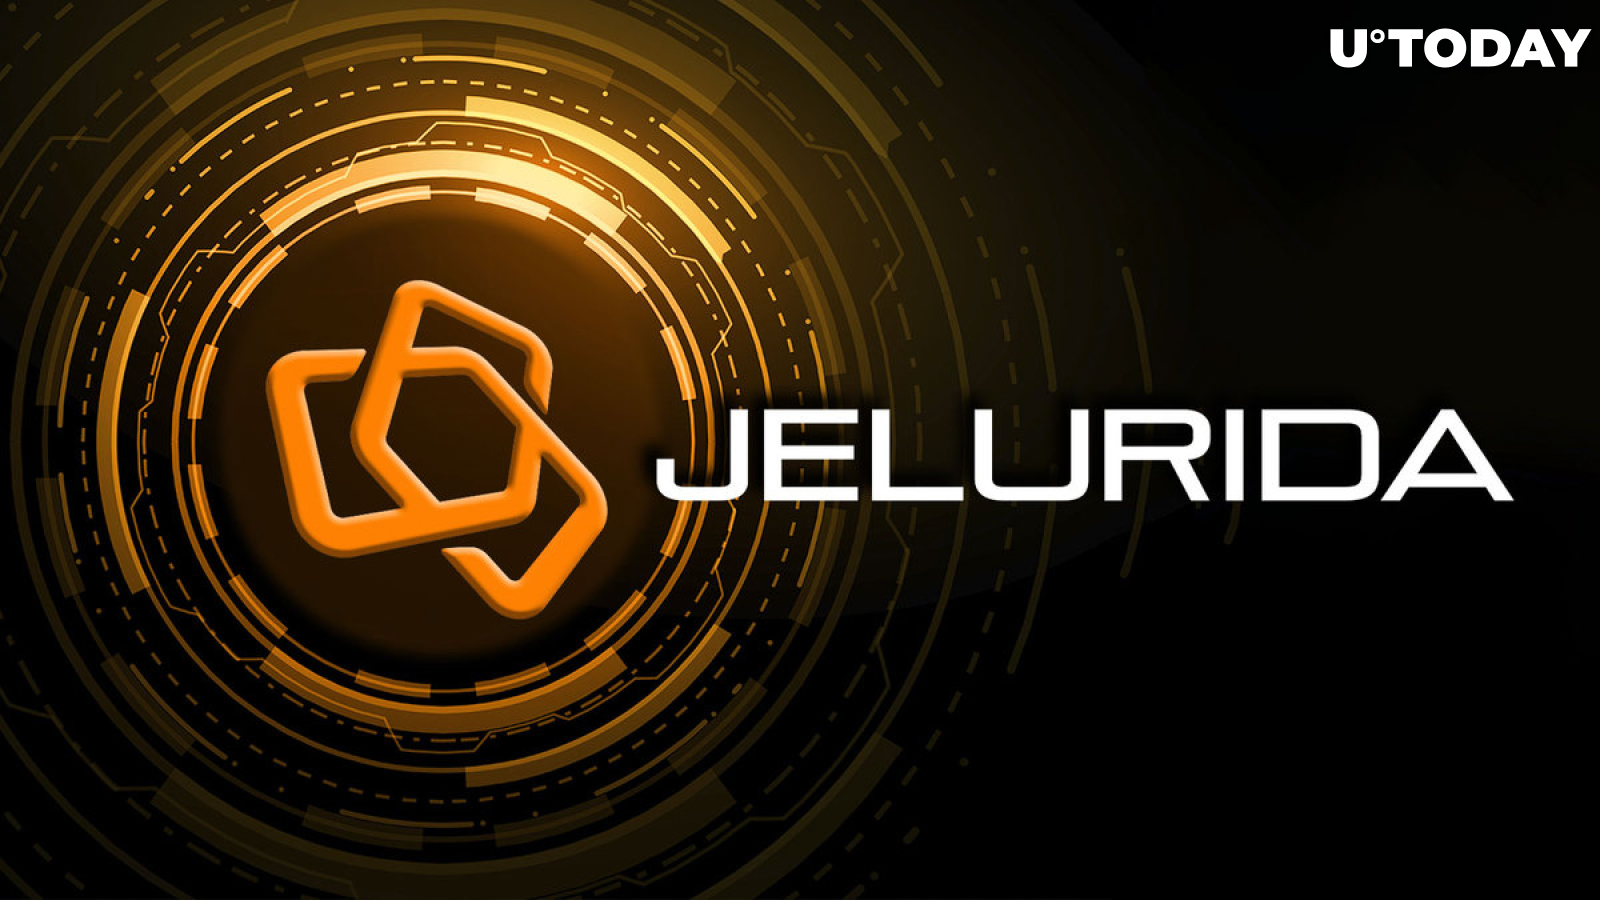 Jelurida Partners With Aumenta Solutions, MSI, Advances Blockchain Usage in Port Infrastructure